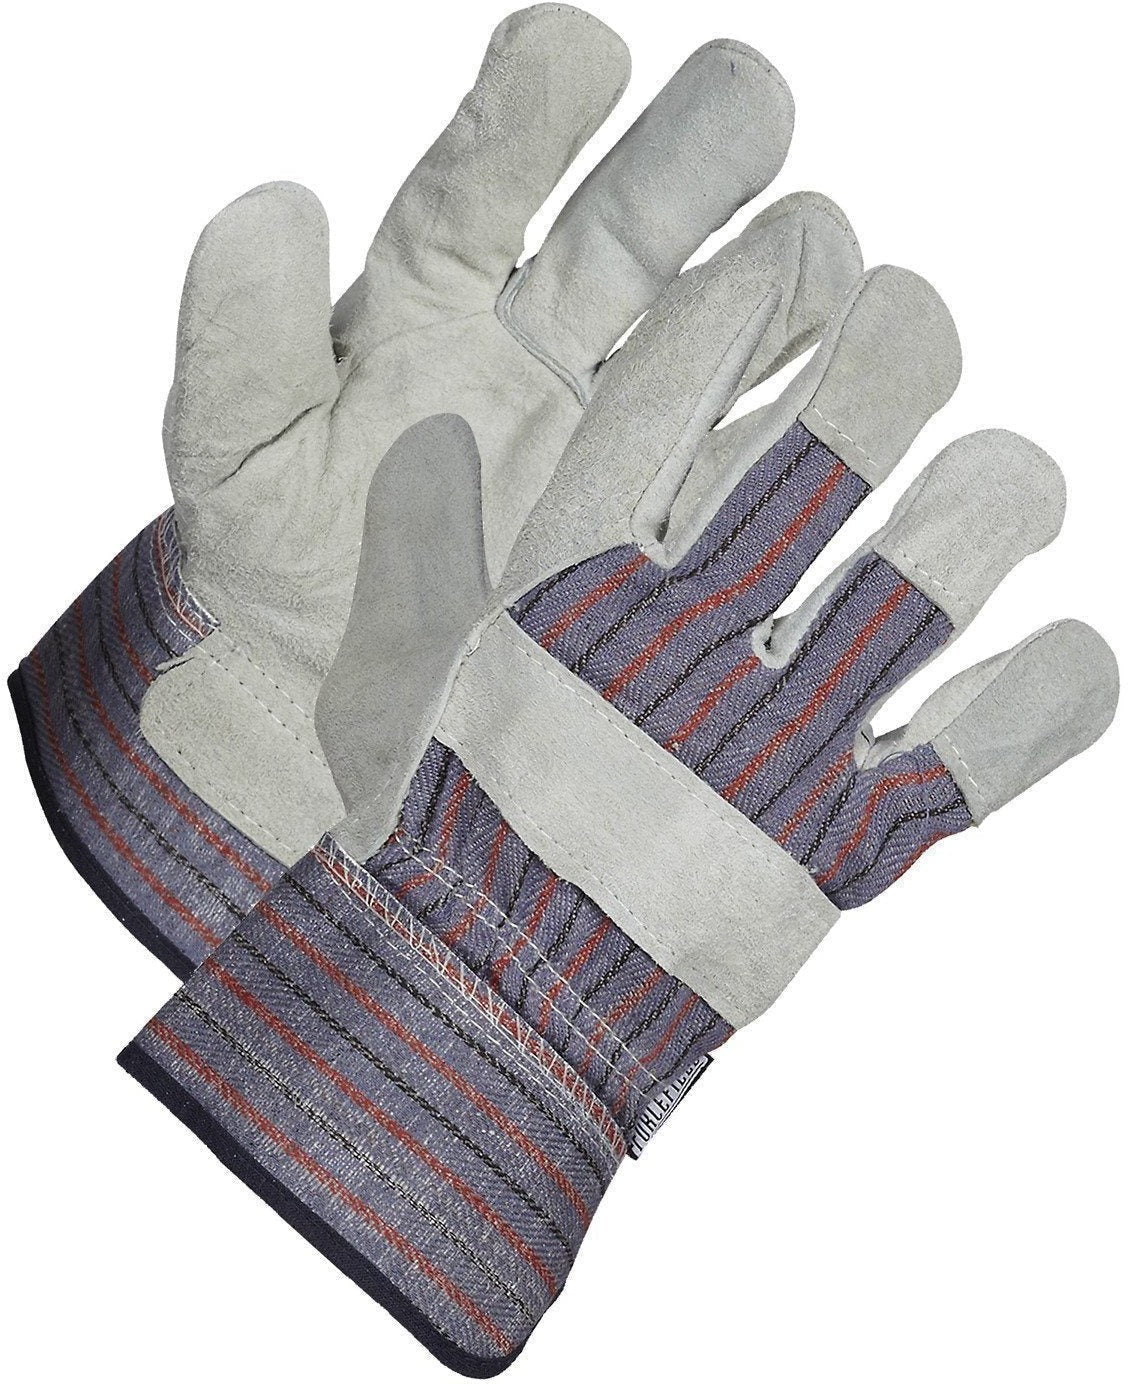 Forcefield - Split Leather Patch Palm Work Safety Gloves with Denim Back and 2.5" Safety Cuff - 015-02525